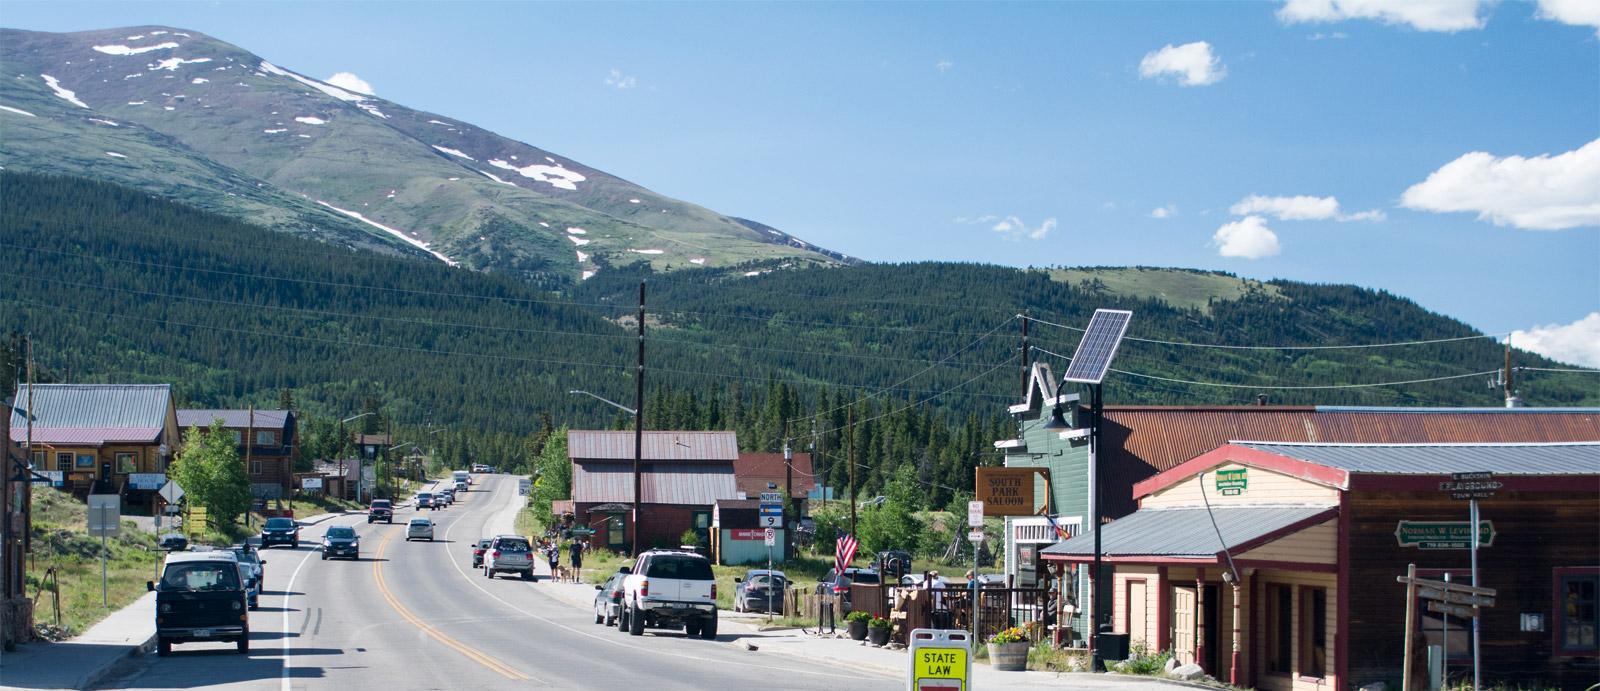 Town of Alma short term rental information, Park County